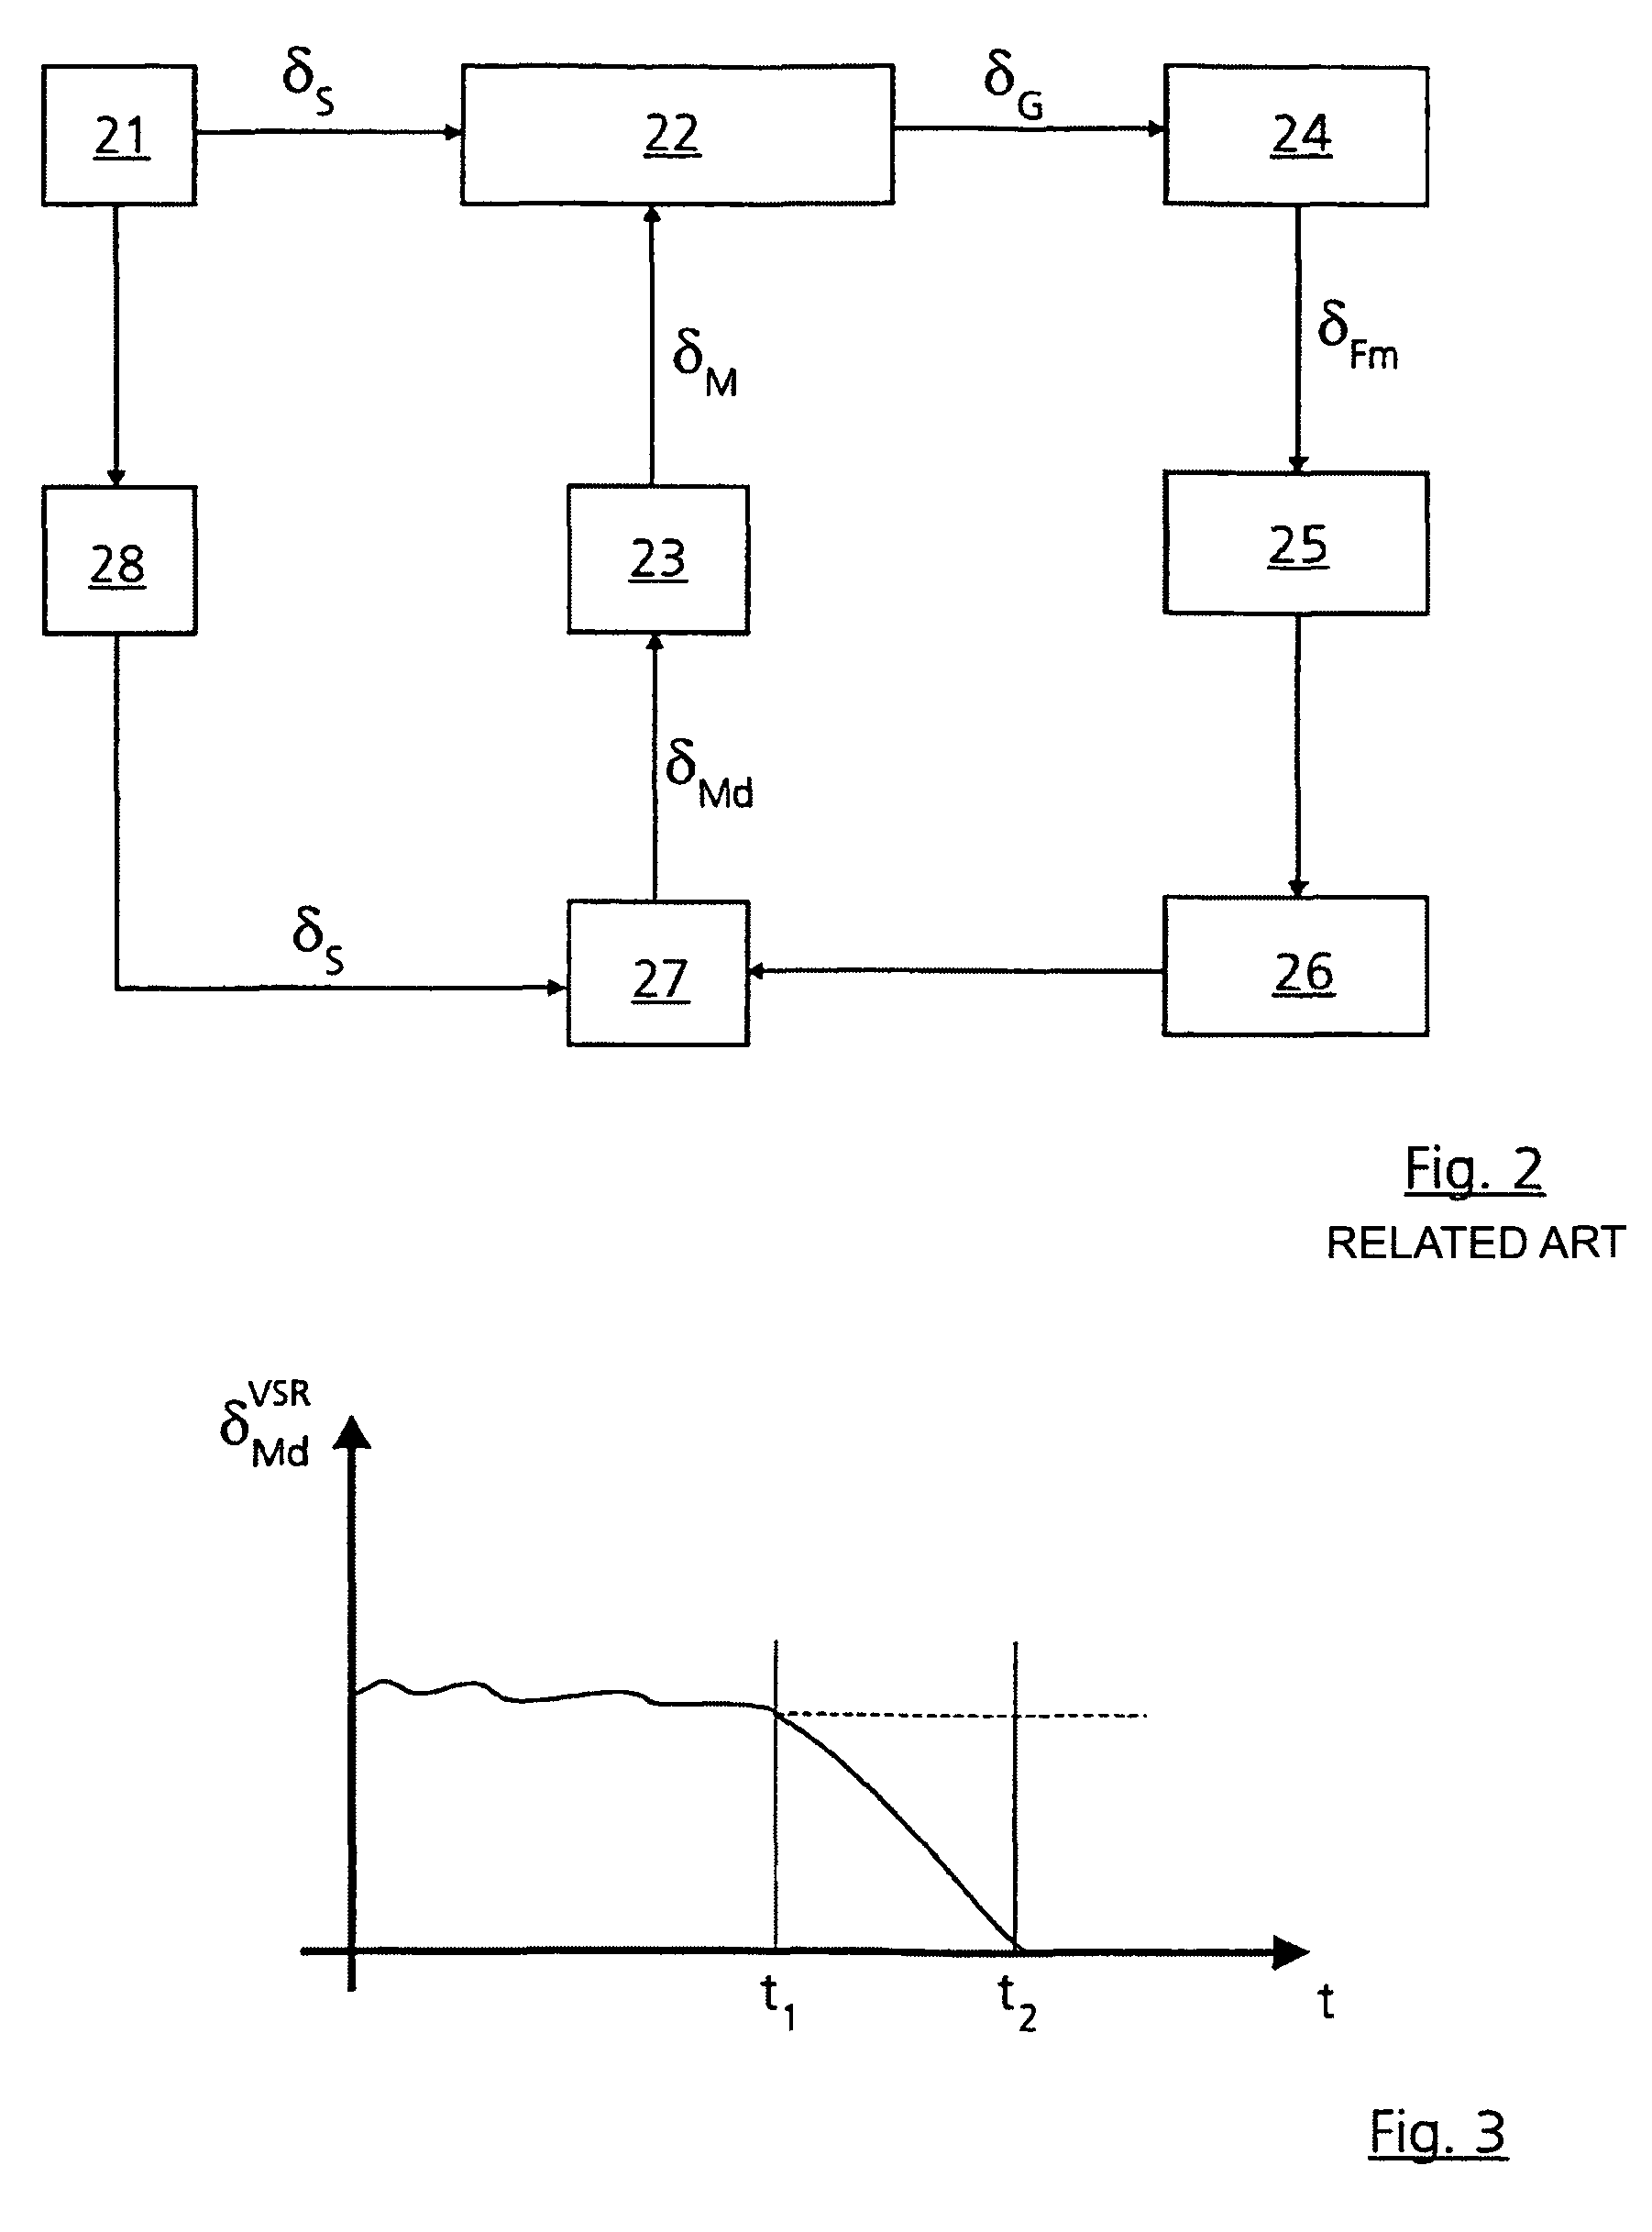 Method for operating a steering system